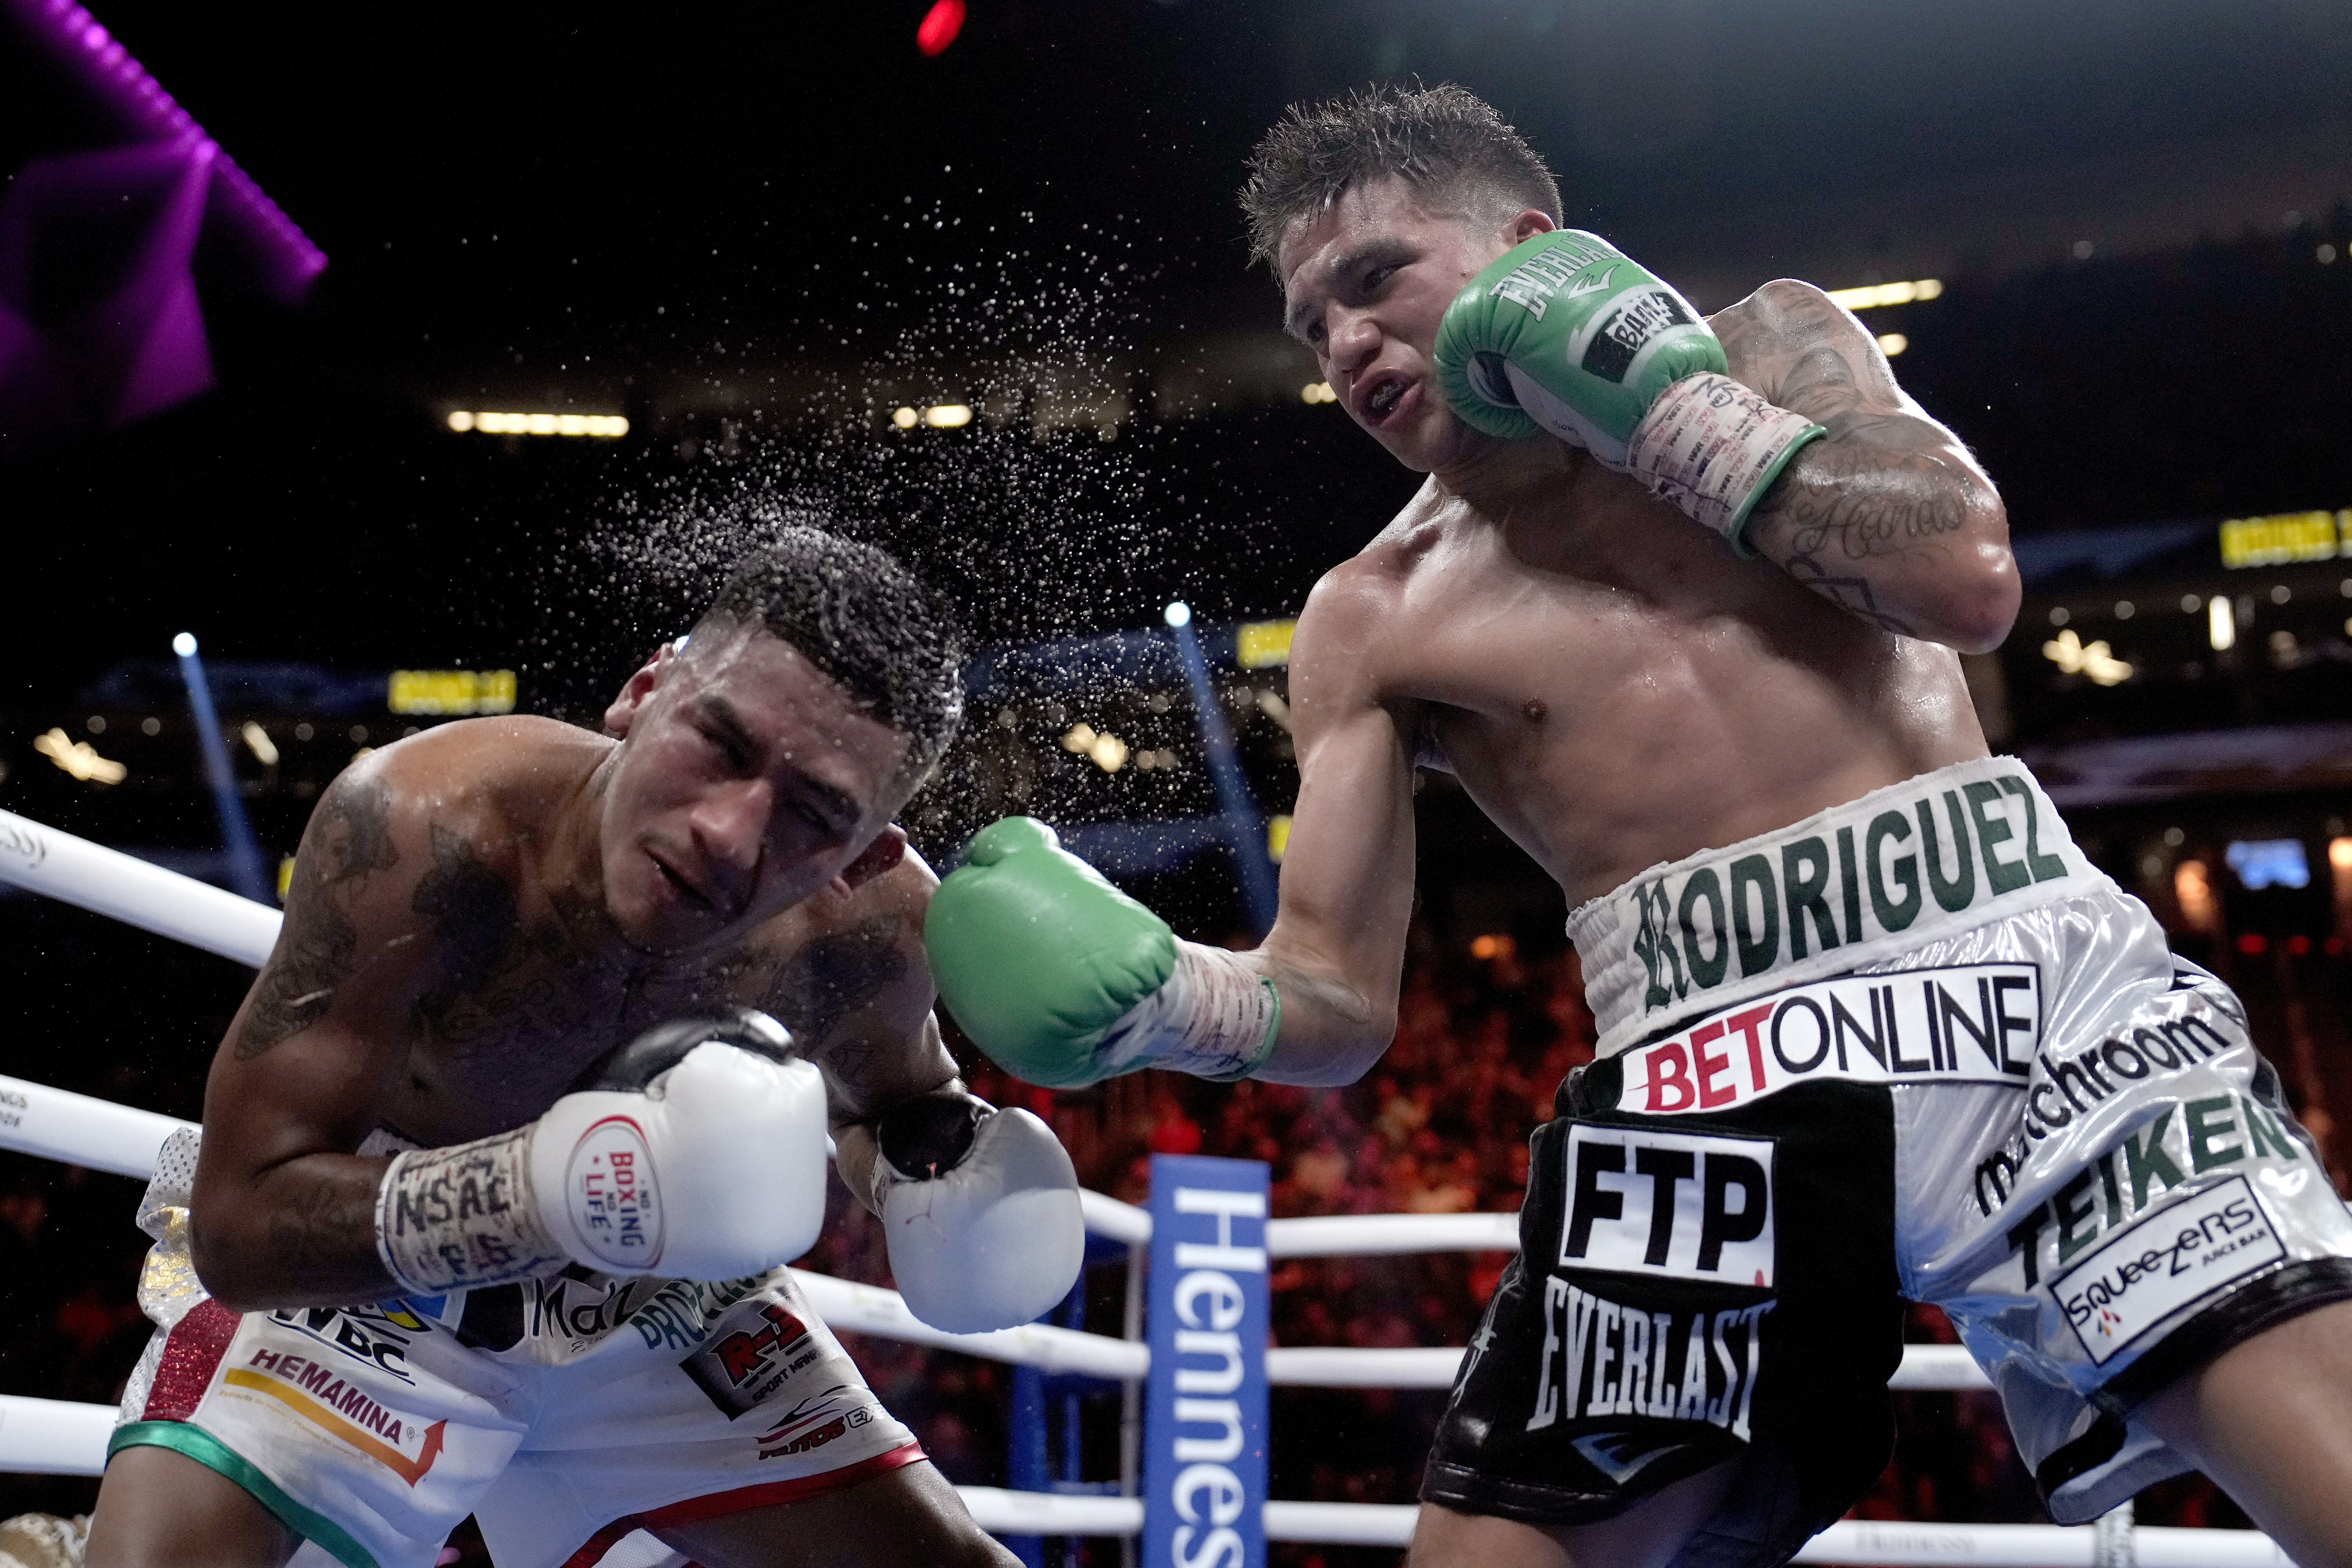 INSIDE THE RING Rodriguez remains undefeated in Las Vegas